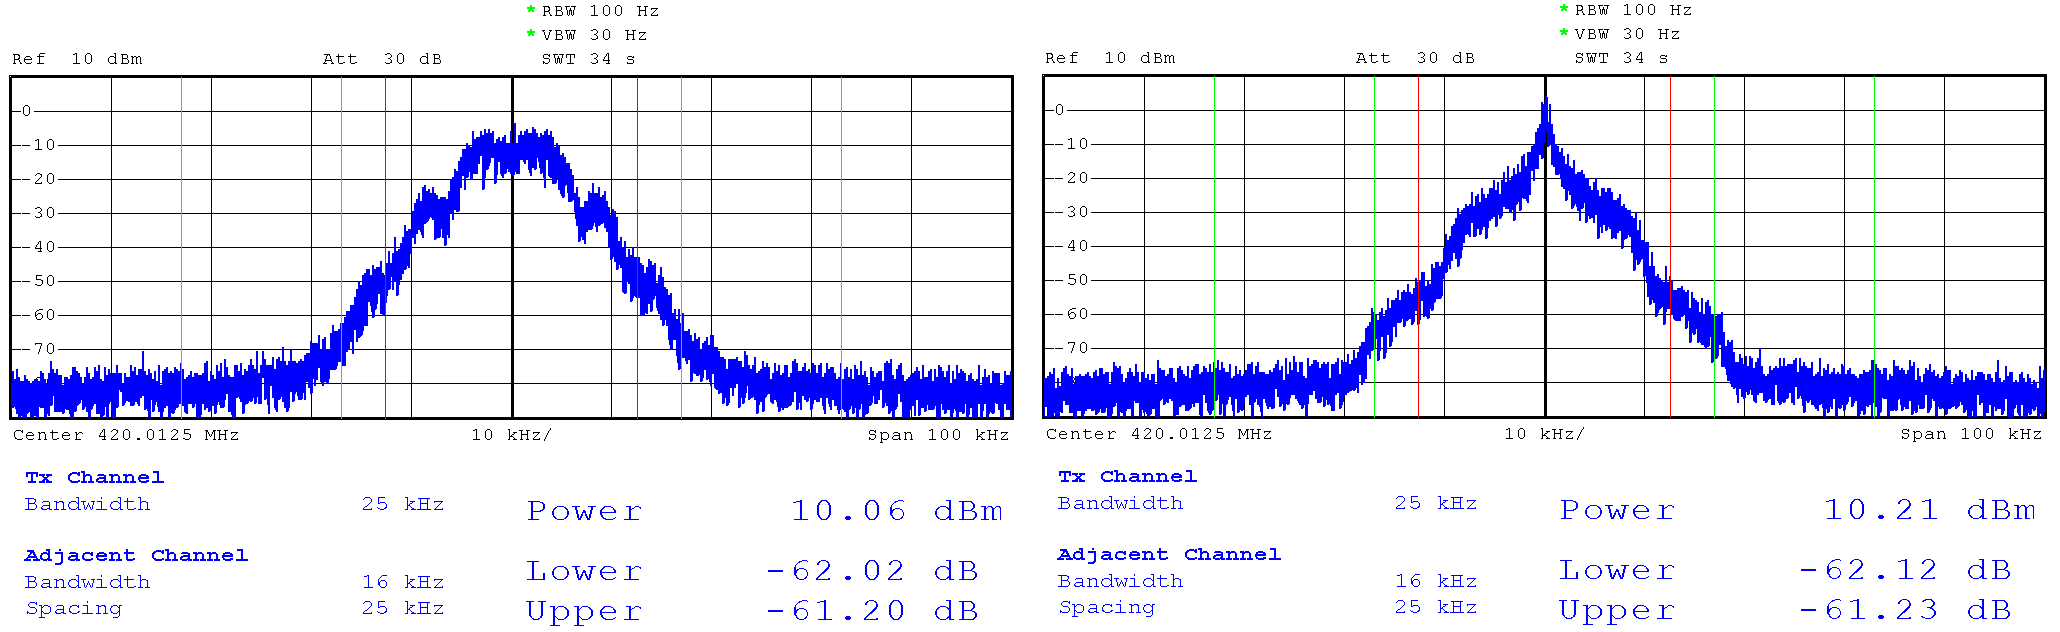 Modulated signal spectrums. (left) 2CPFSK with R=10.4 kBaud, modulation index h~0.6. (right) 2CPFSK with R=17.3 kBaud, modulation index h~0.2. 30 dB attenuator used in series.